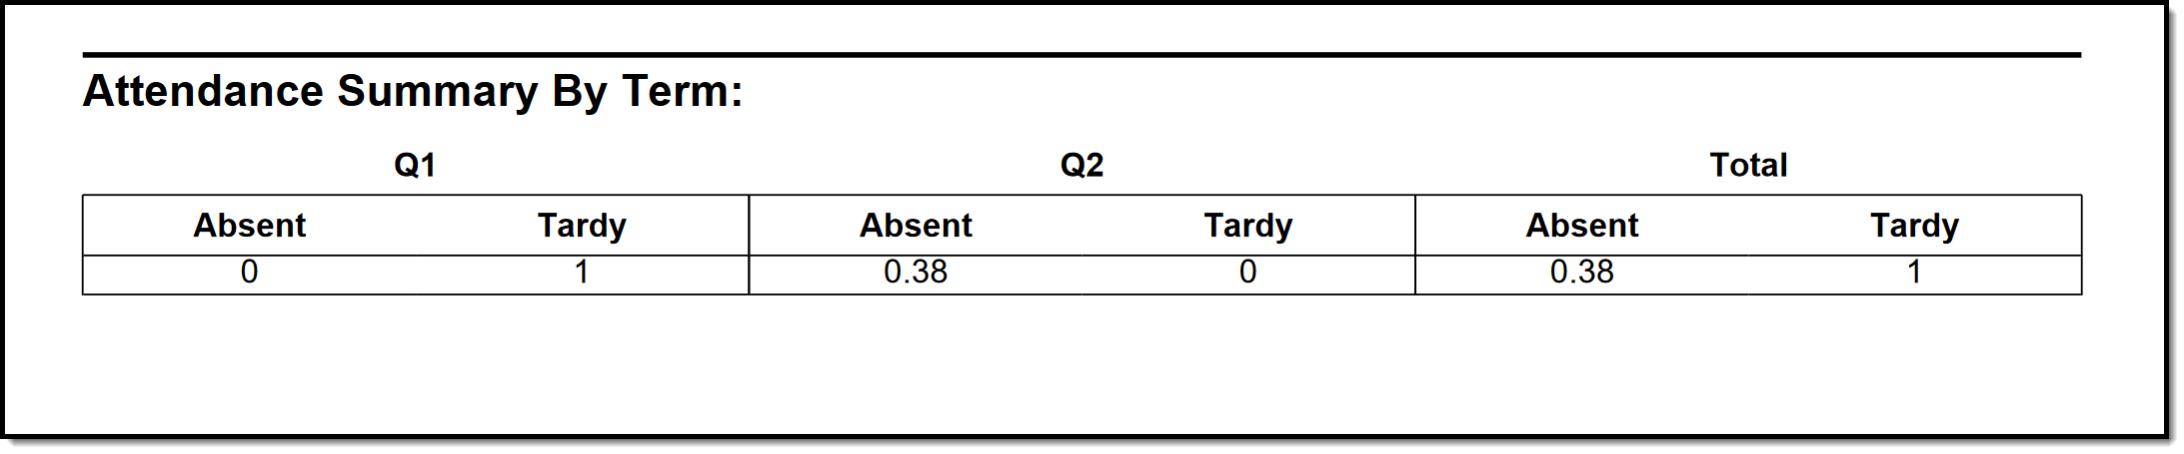 Screenshot of attendance summary with multiple terms